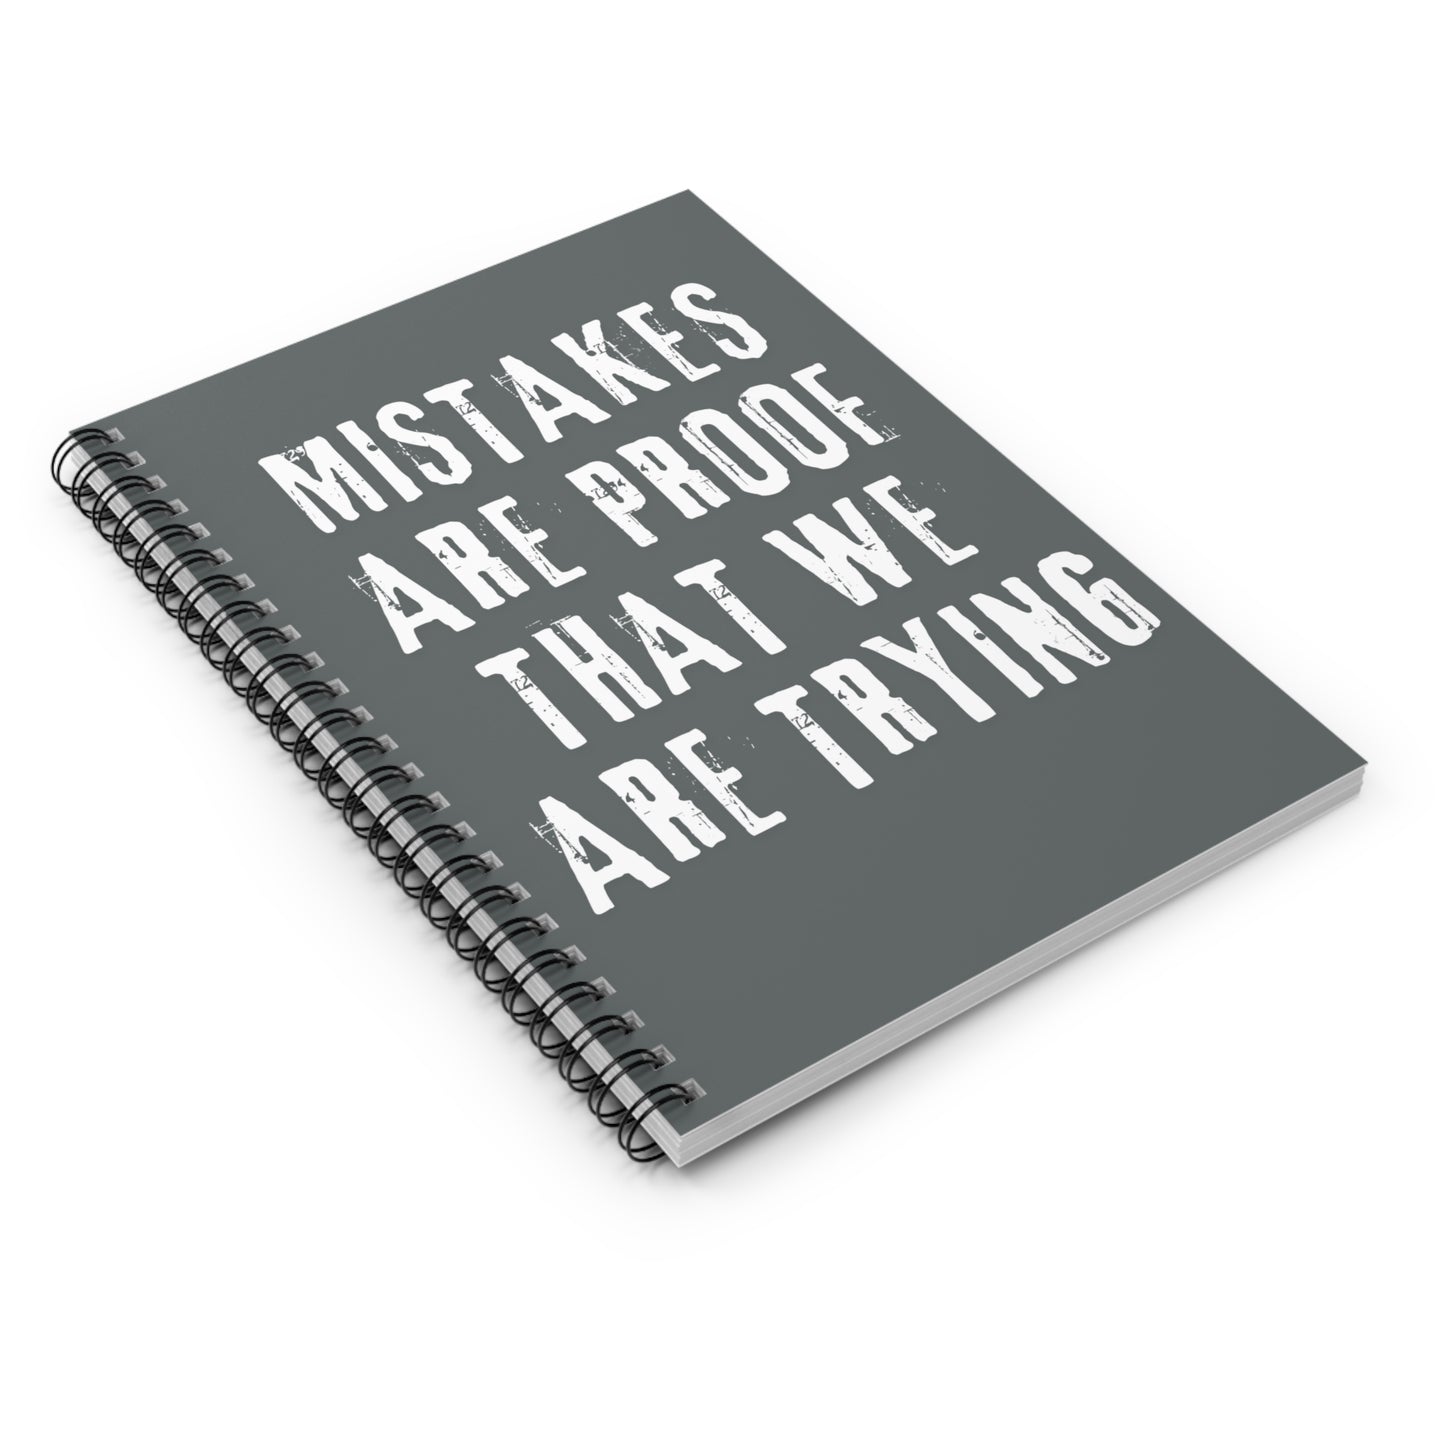 Mistakes are proof Spiral Notebook - Ruled Line